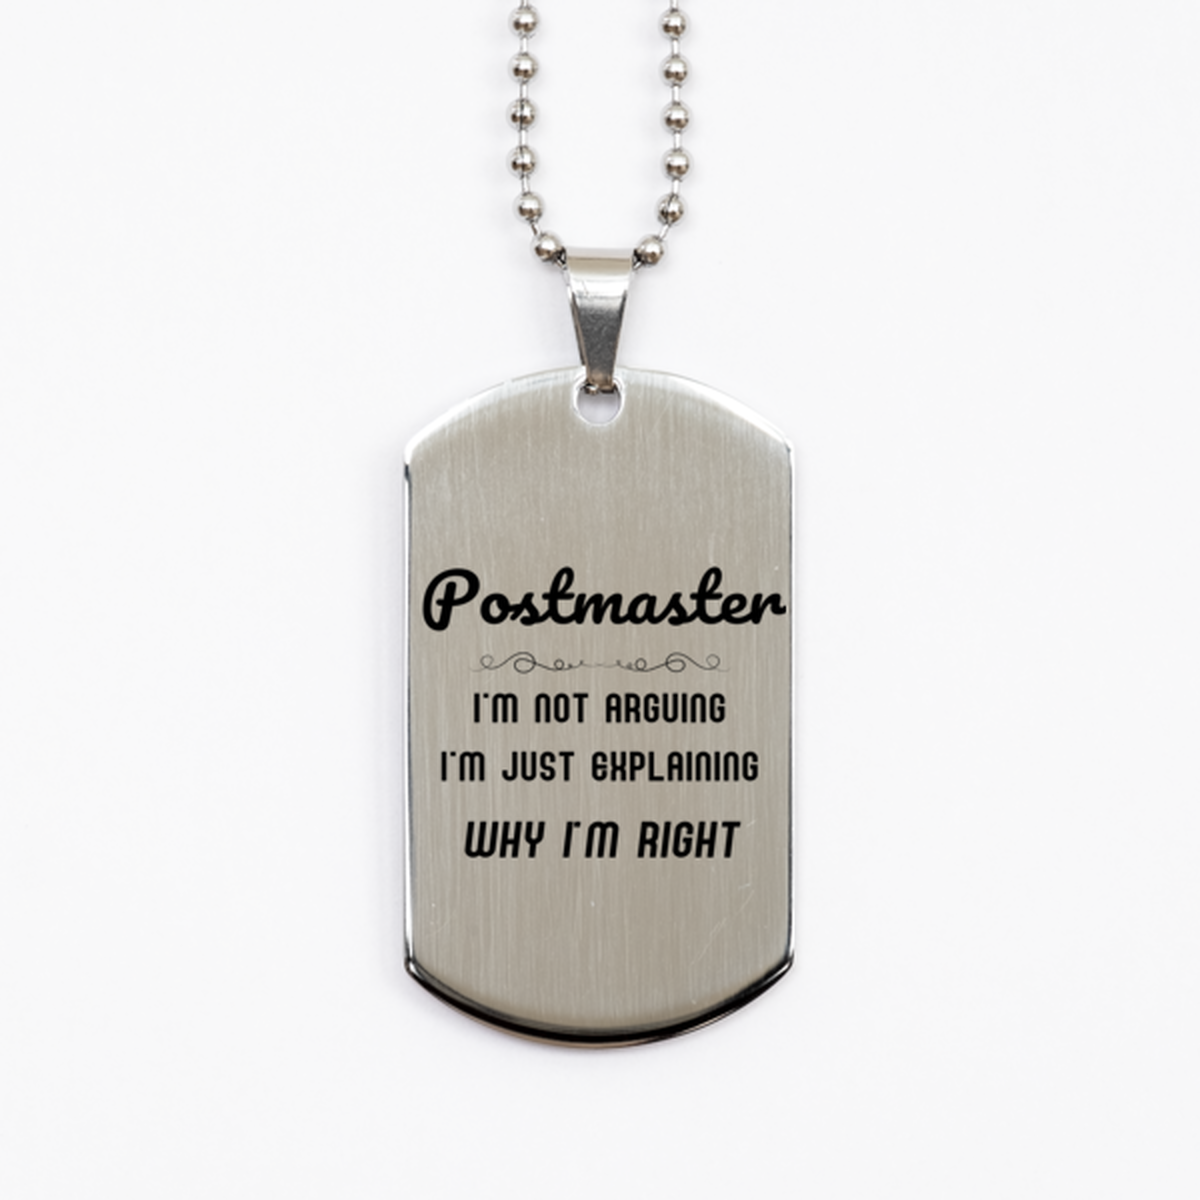 Postmaster I'm not Arguing. I'm Just Explaining Why I'm RIGHT Silver Dog Tag, Funny Saying Quote Postmaster Gifts For Postmaster Graduation Birthday Christmas Gifts for Men Women Coworker